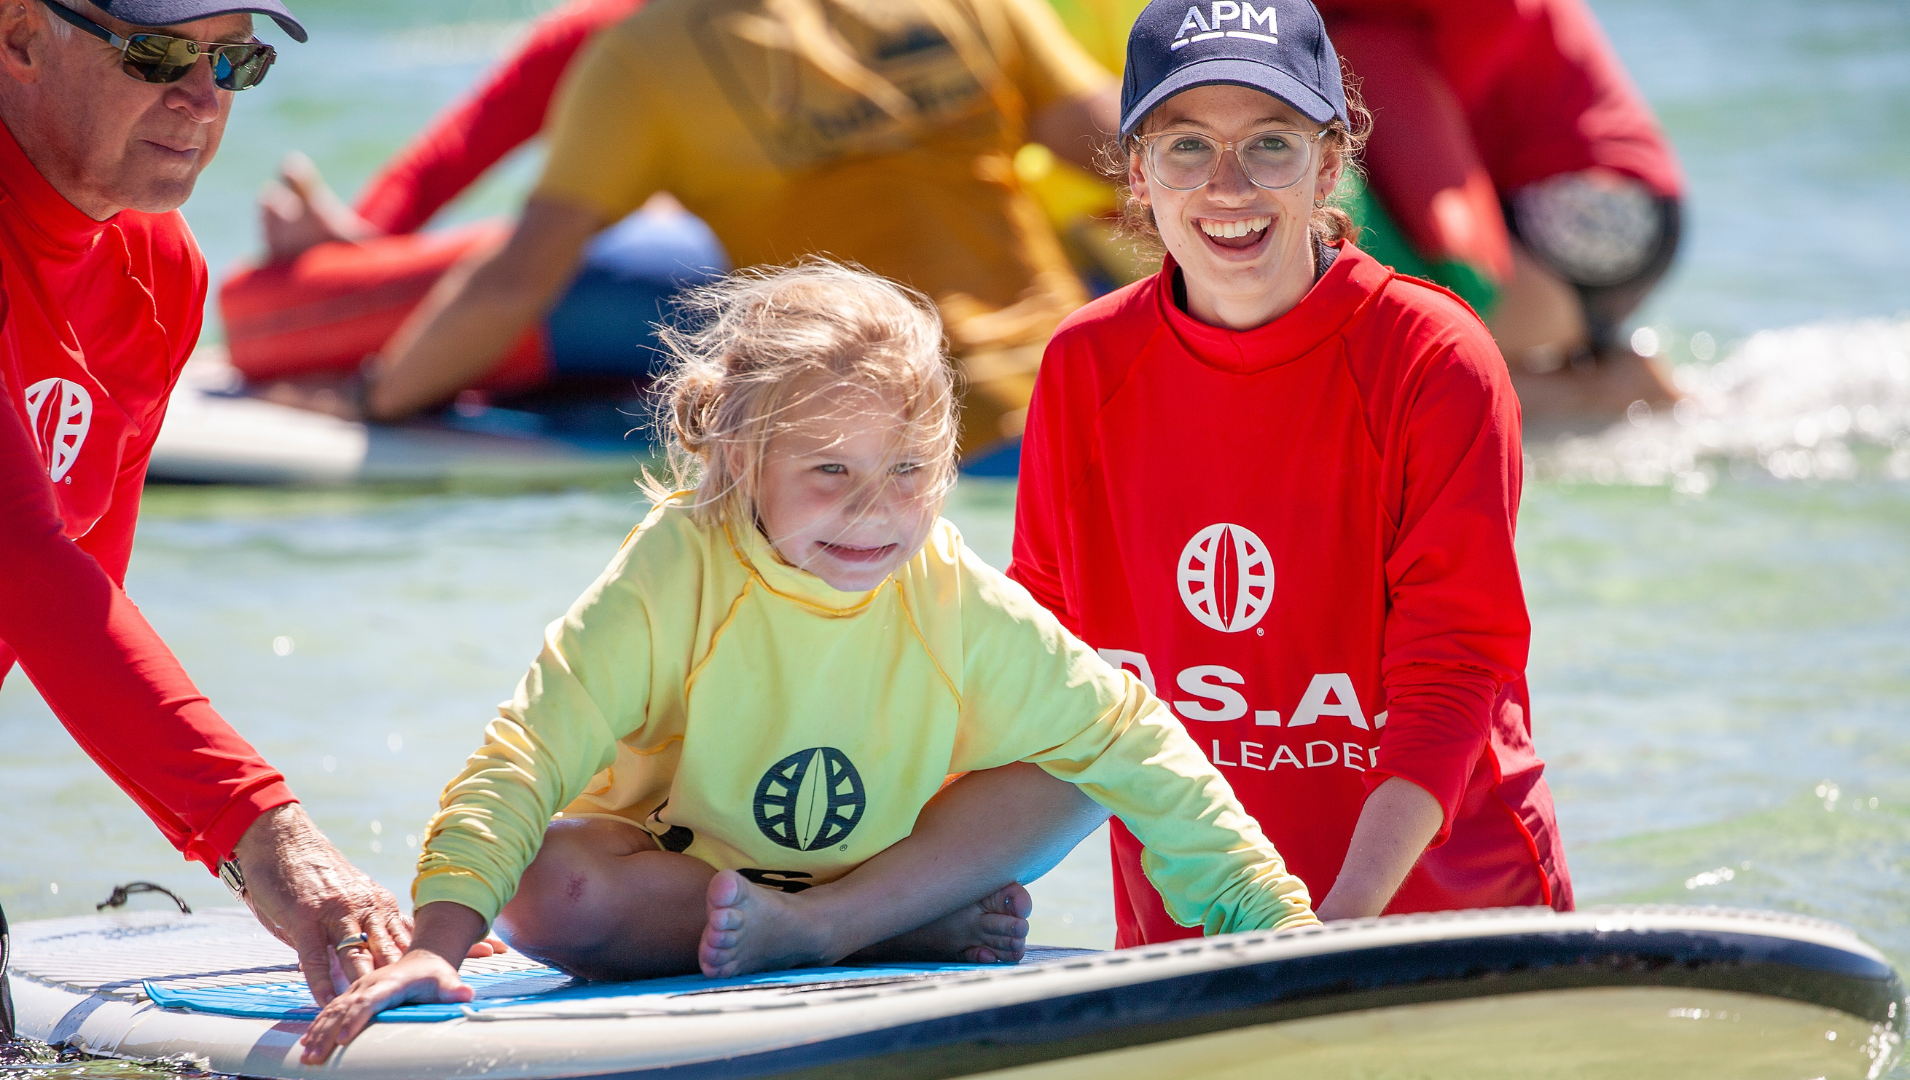 Two members of APM Communities assist a young child to float along on a SUP board